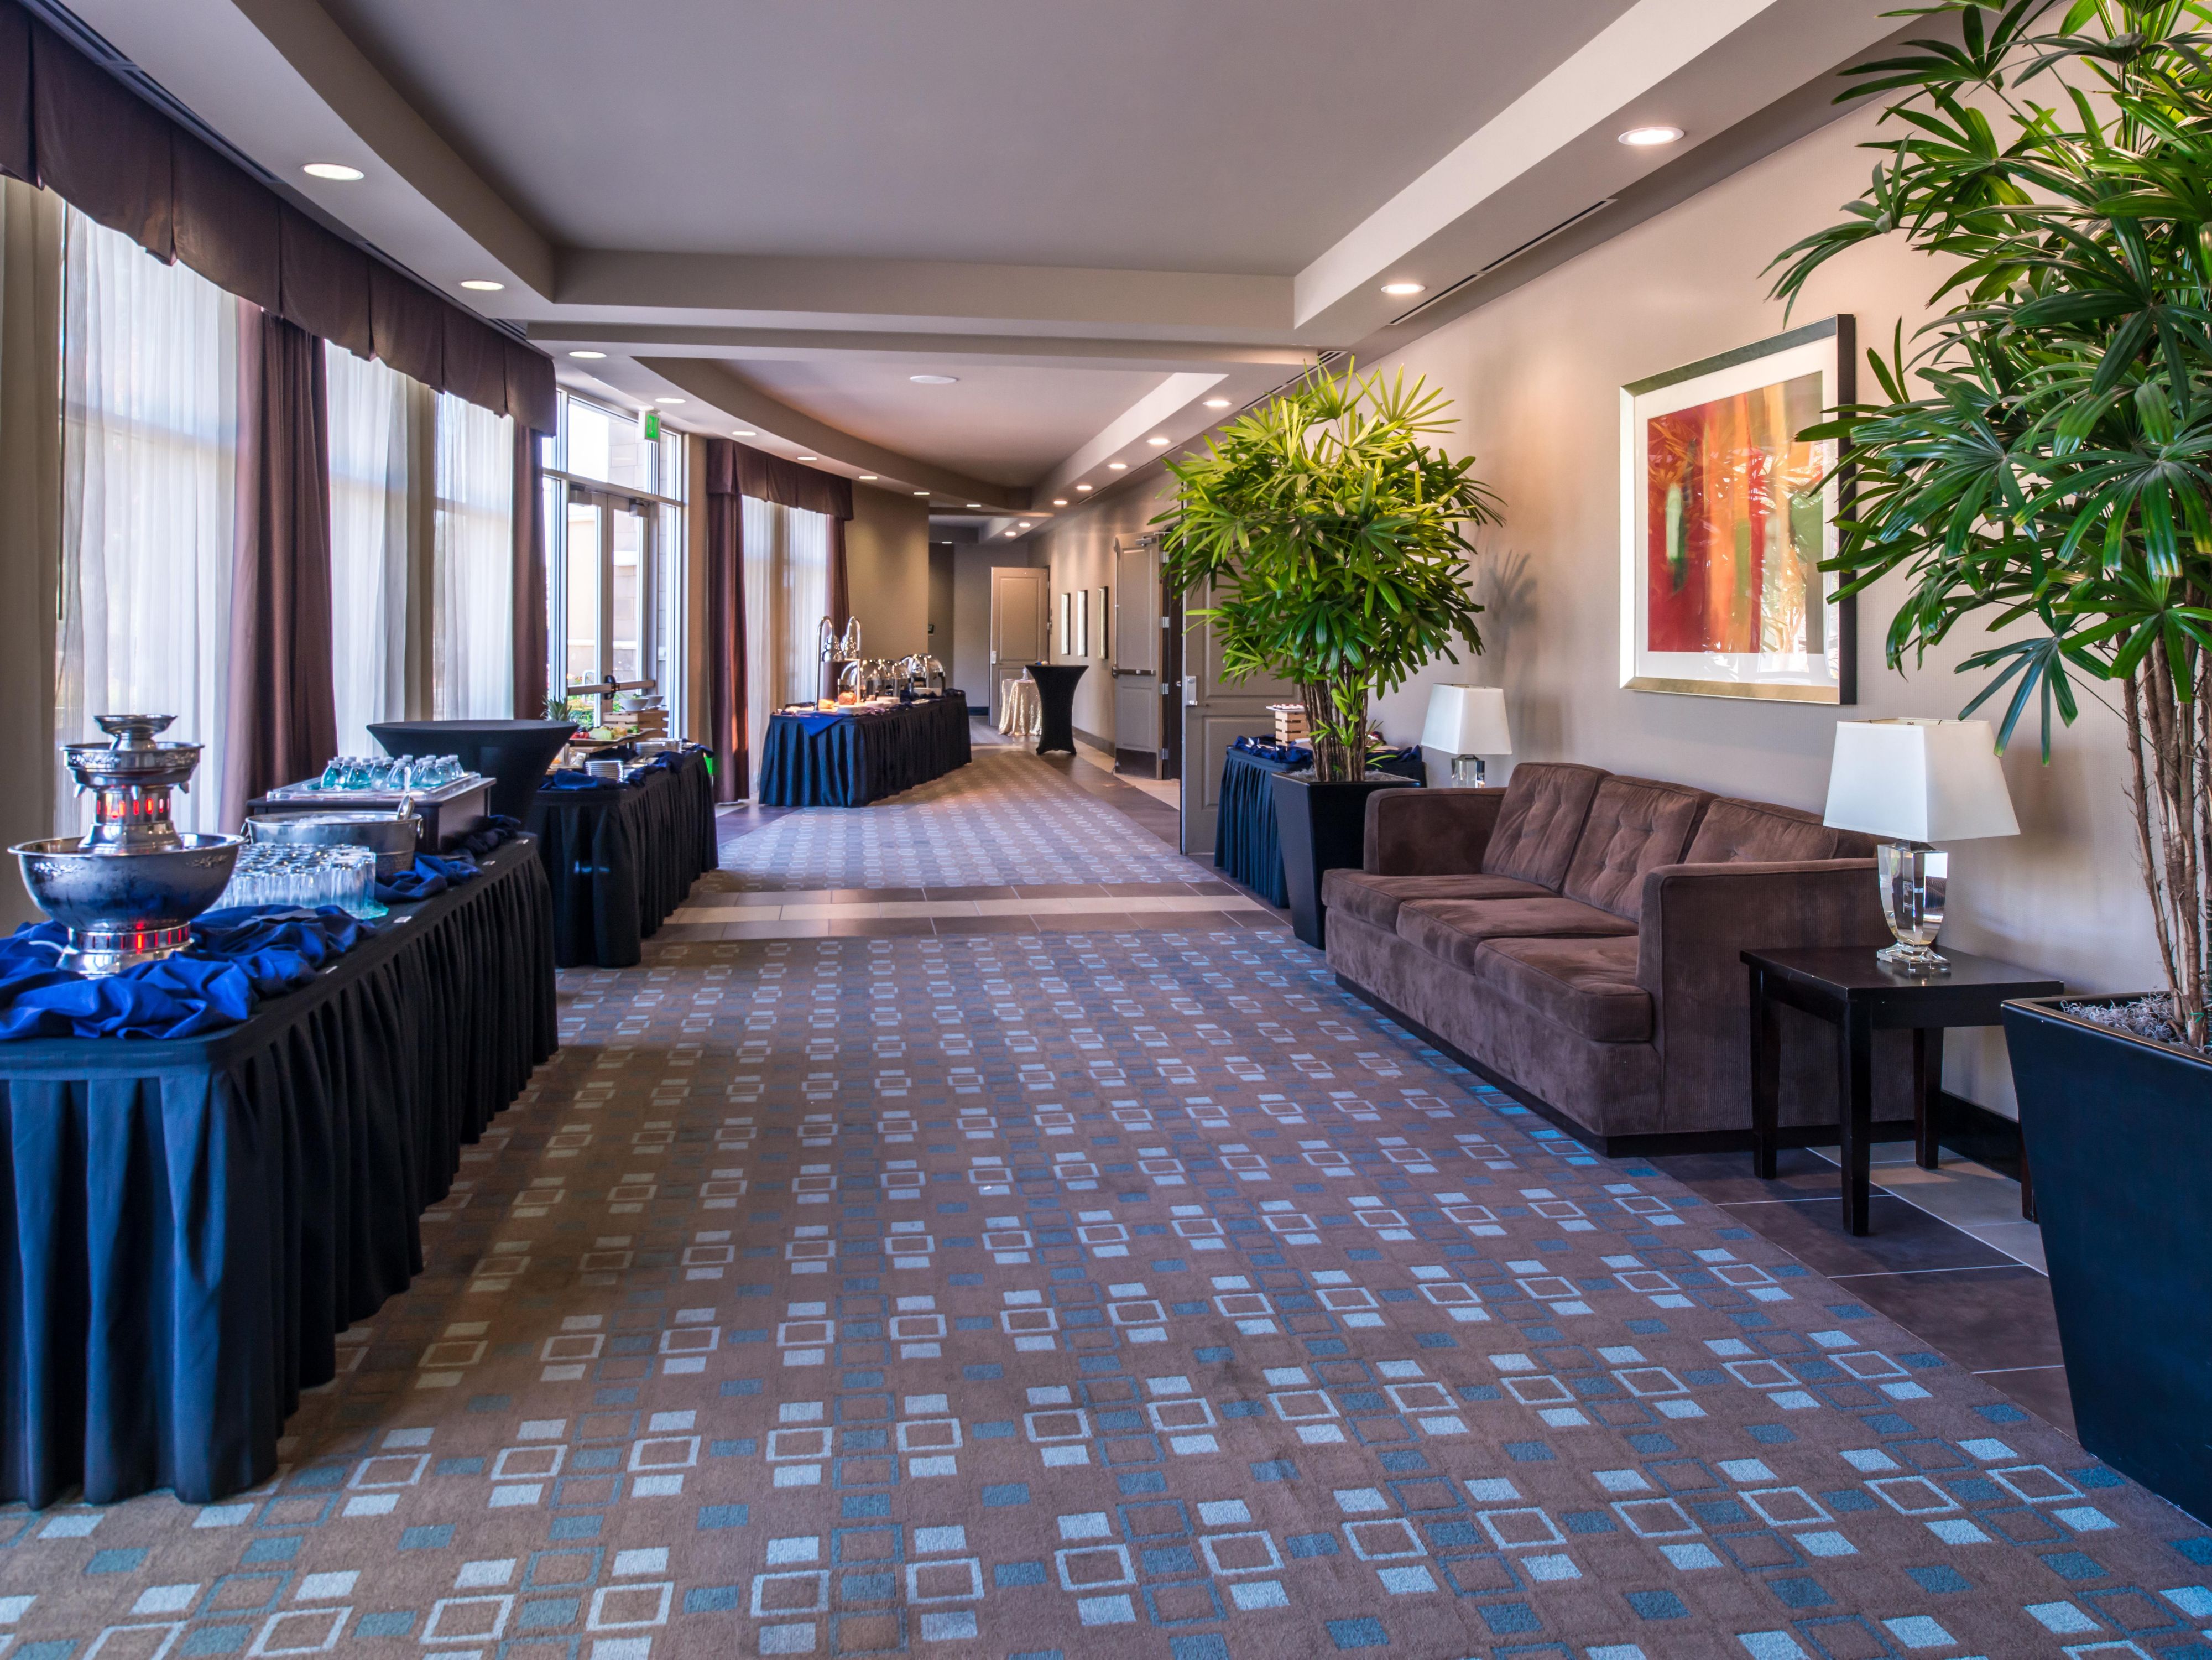 Our hotel features flexible meeting and banquet space with in-house catering and AV packages available for your customized event. Call the hotel for more info!